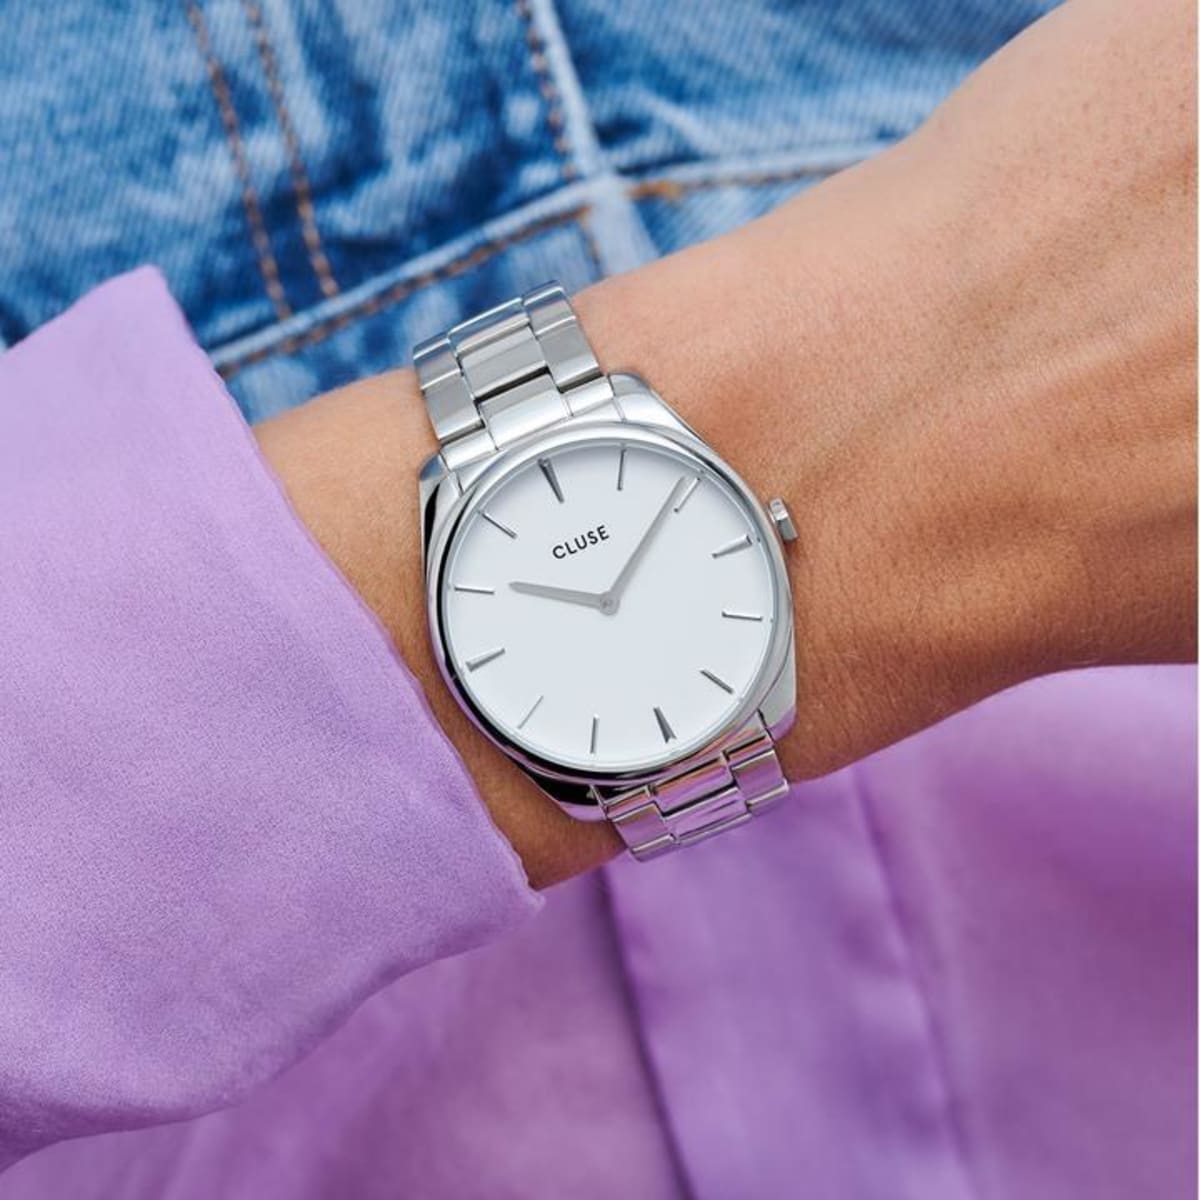 If you like to blur the lines between minimalism and glamour, this CLUSE Féroce watch offers you the best of both worlds. It's a true classic. An ode to our love for minimalism and joie de vivre. Its 36 mm case is refined but pronounced: a perfect companion for the mid-sized wrist. The matte white dial blends perfectly with the silver coloured case and link bracelet. You can easily interchange the strap of this Féroce model with any 18 mm CLUSE watch strap.